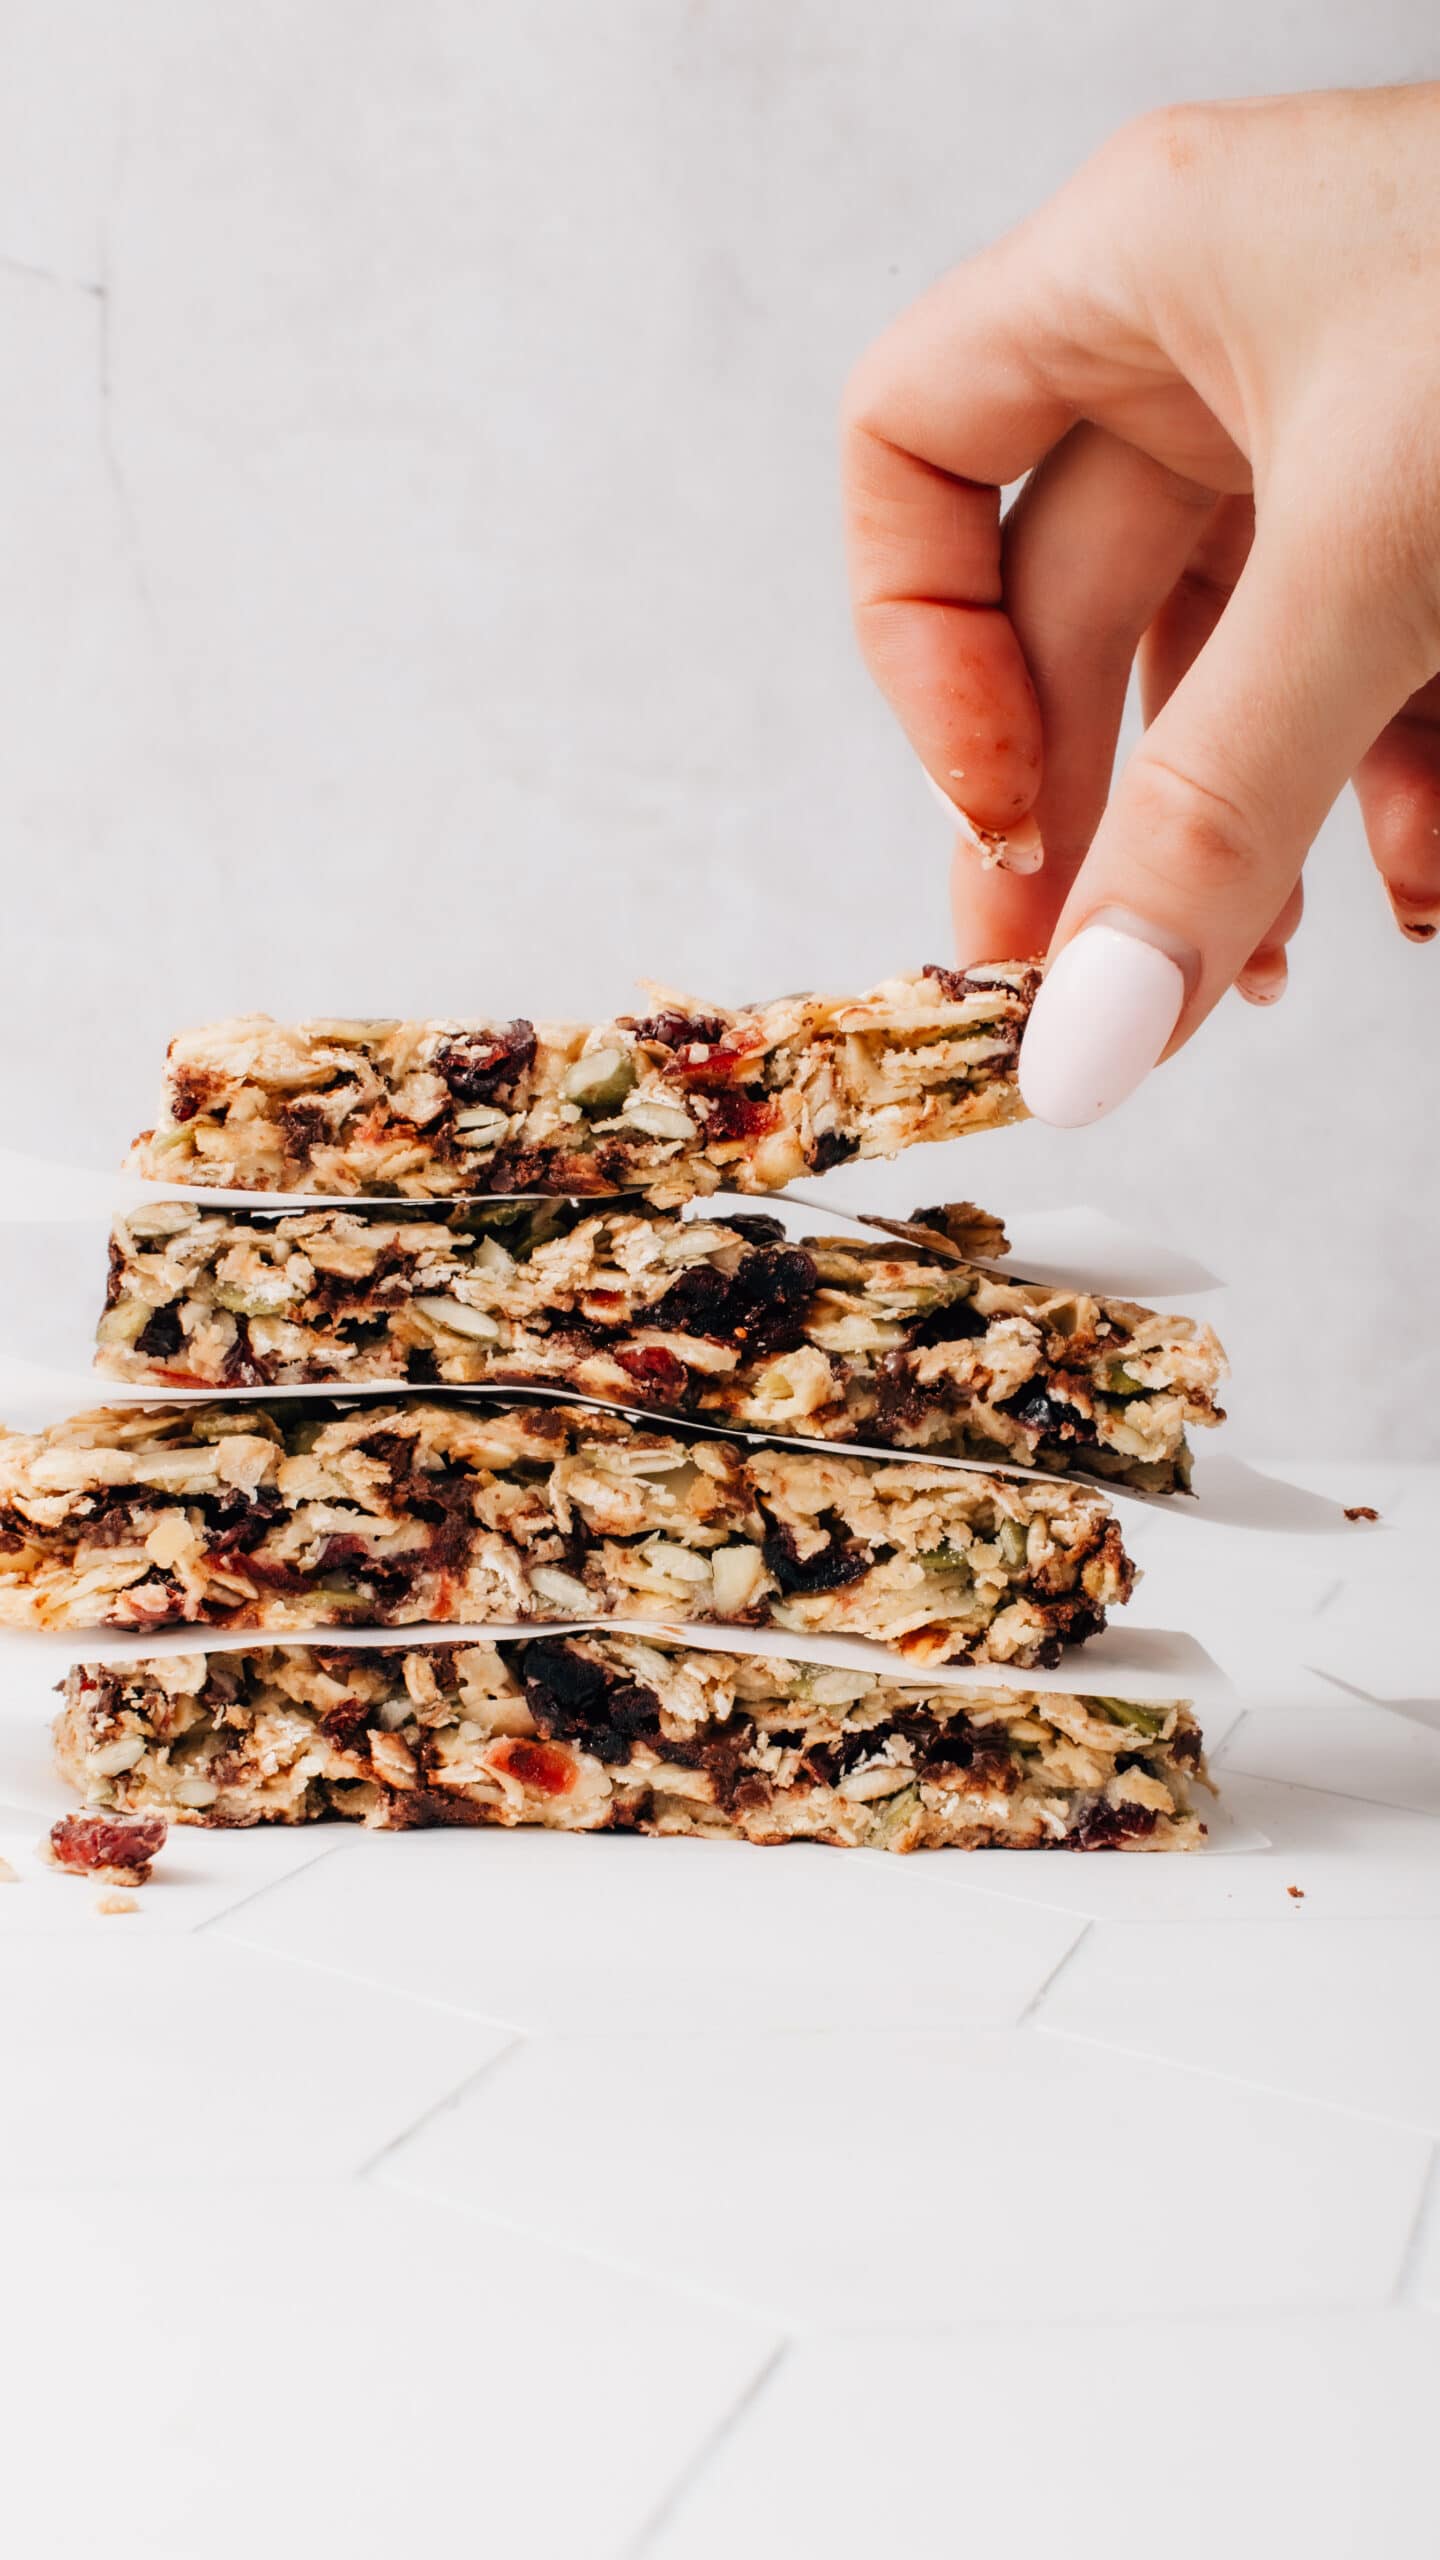 Best Healthy Homemade Chewy Granola Bars Recipe